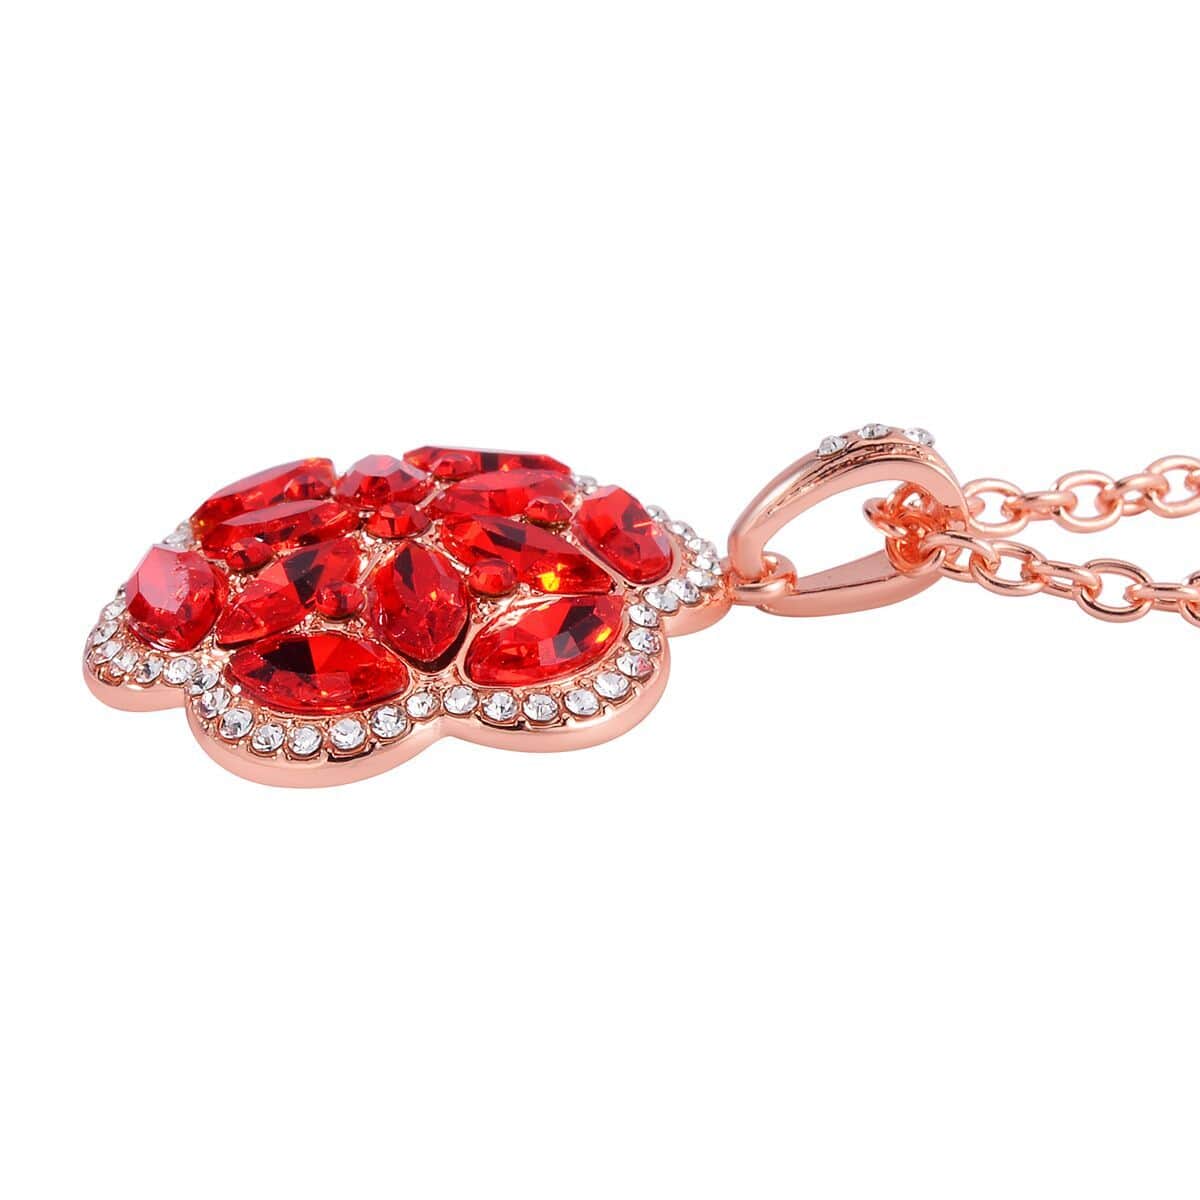 Red and White Austrian Crystal, Faux Leather Floral Bracelet (6-8In), Earrings, Ring (Size 8.0) and Pendant Necklace 20-22 Inches In Rosetone image number 6